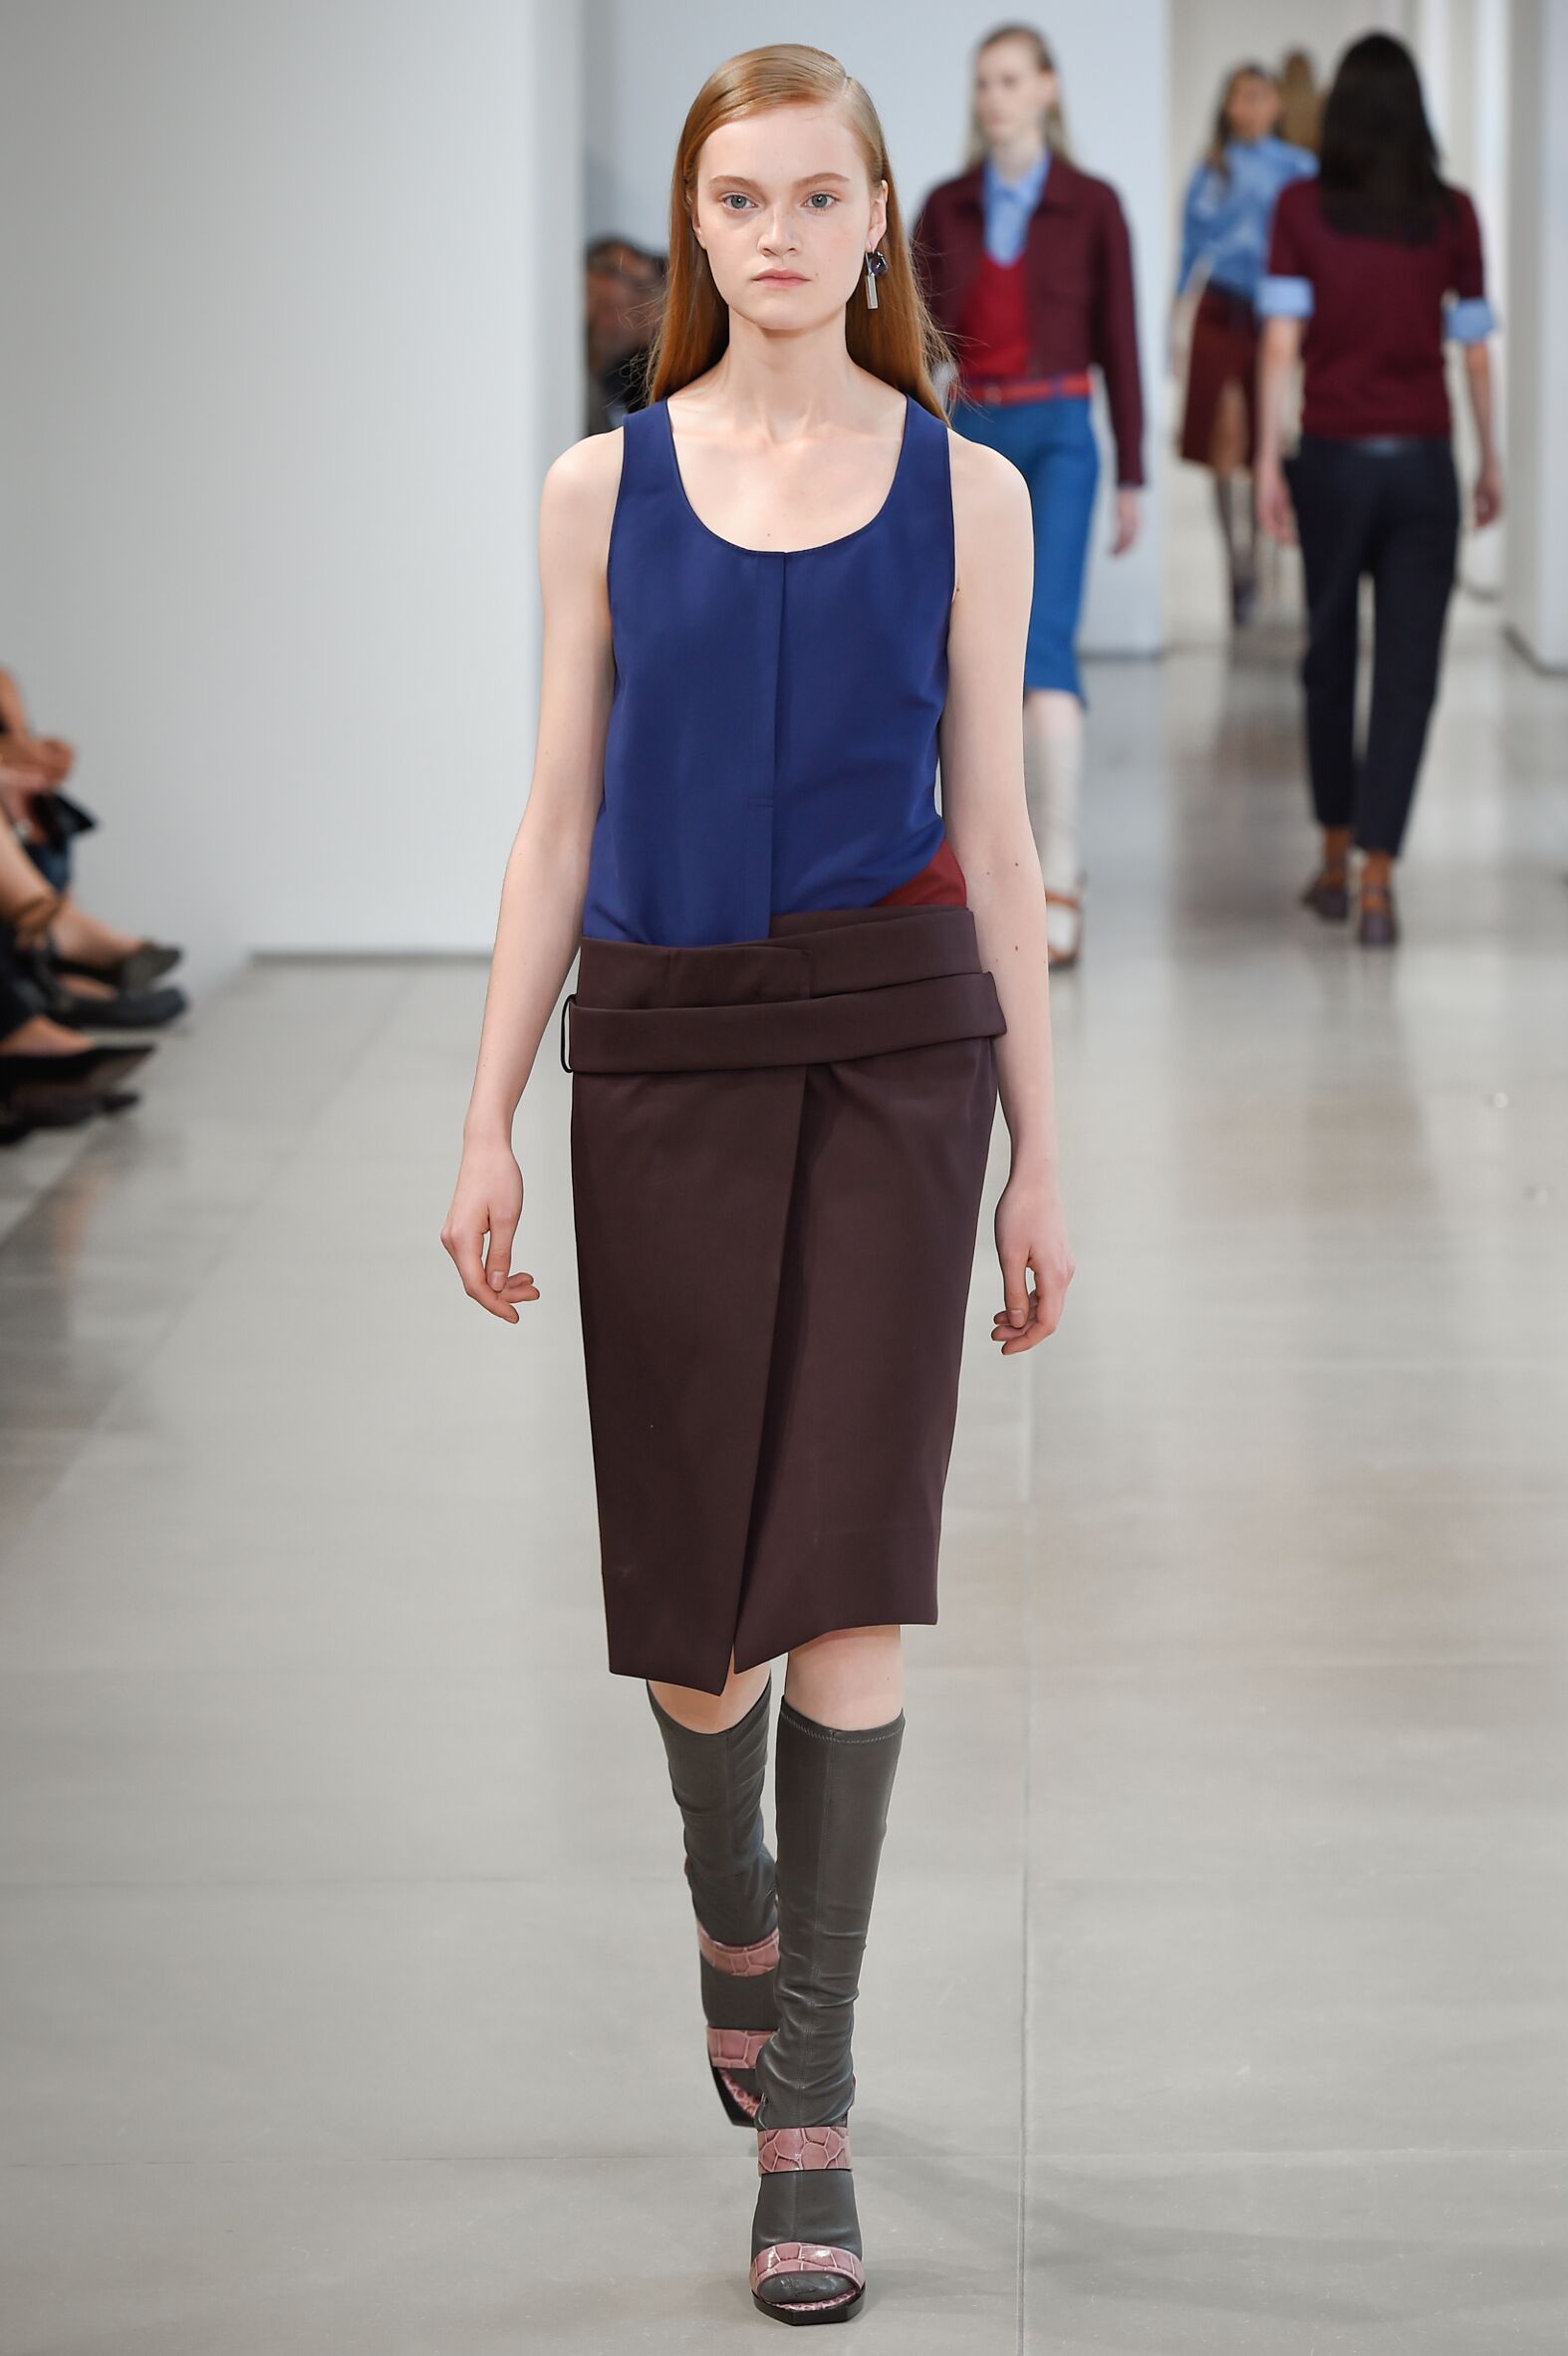 JIL SANDER SPRING SUMMER 2015 WOMEN'S COLLECTION | The Skinny Beep